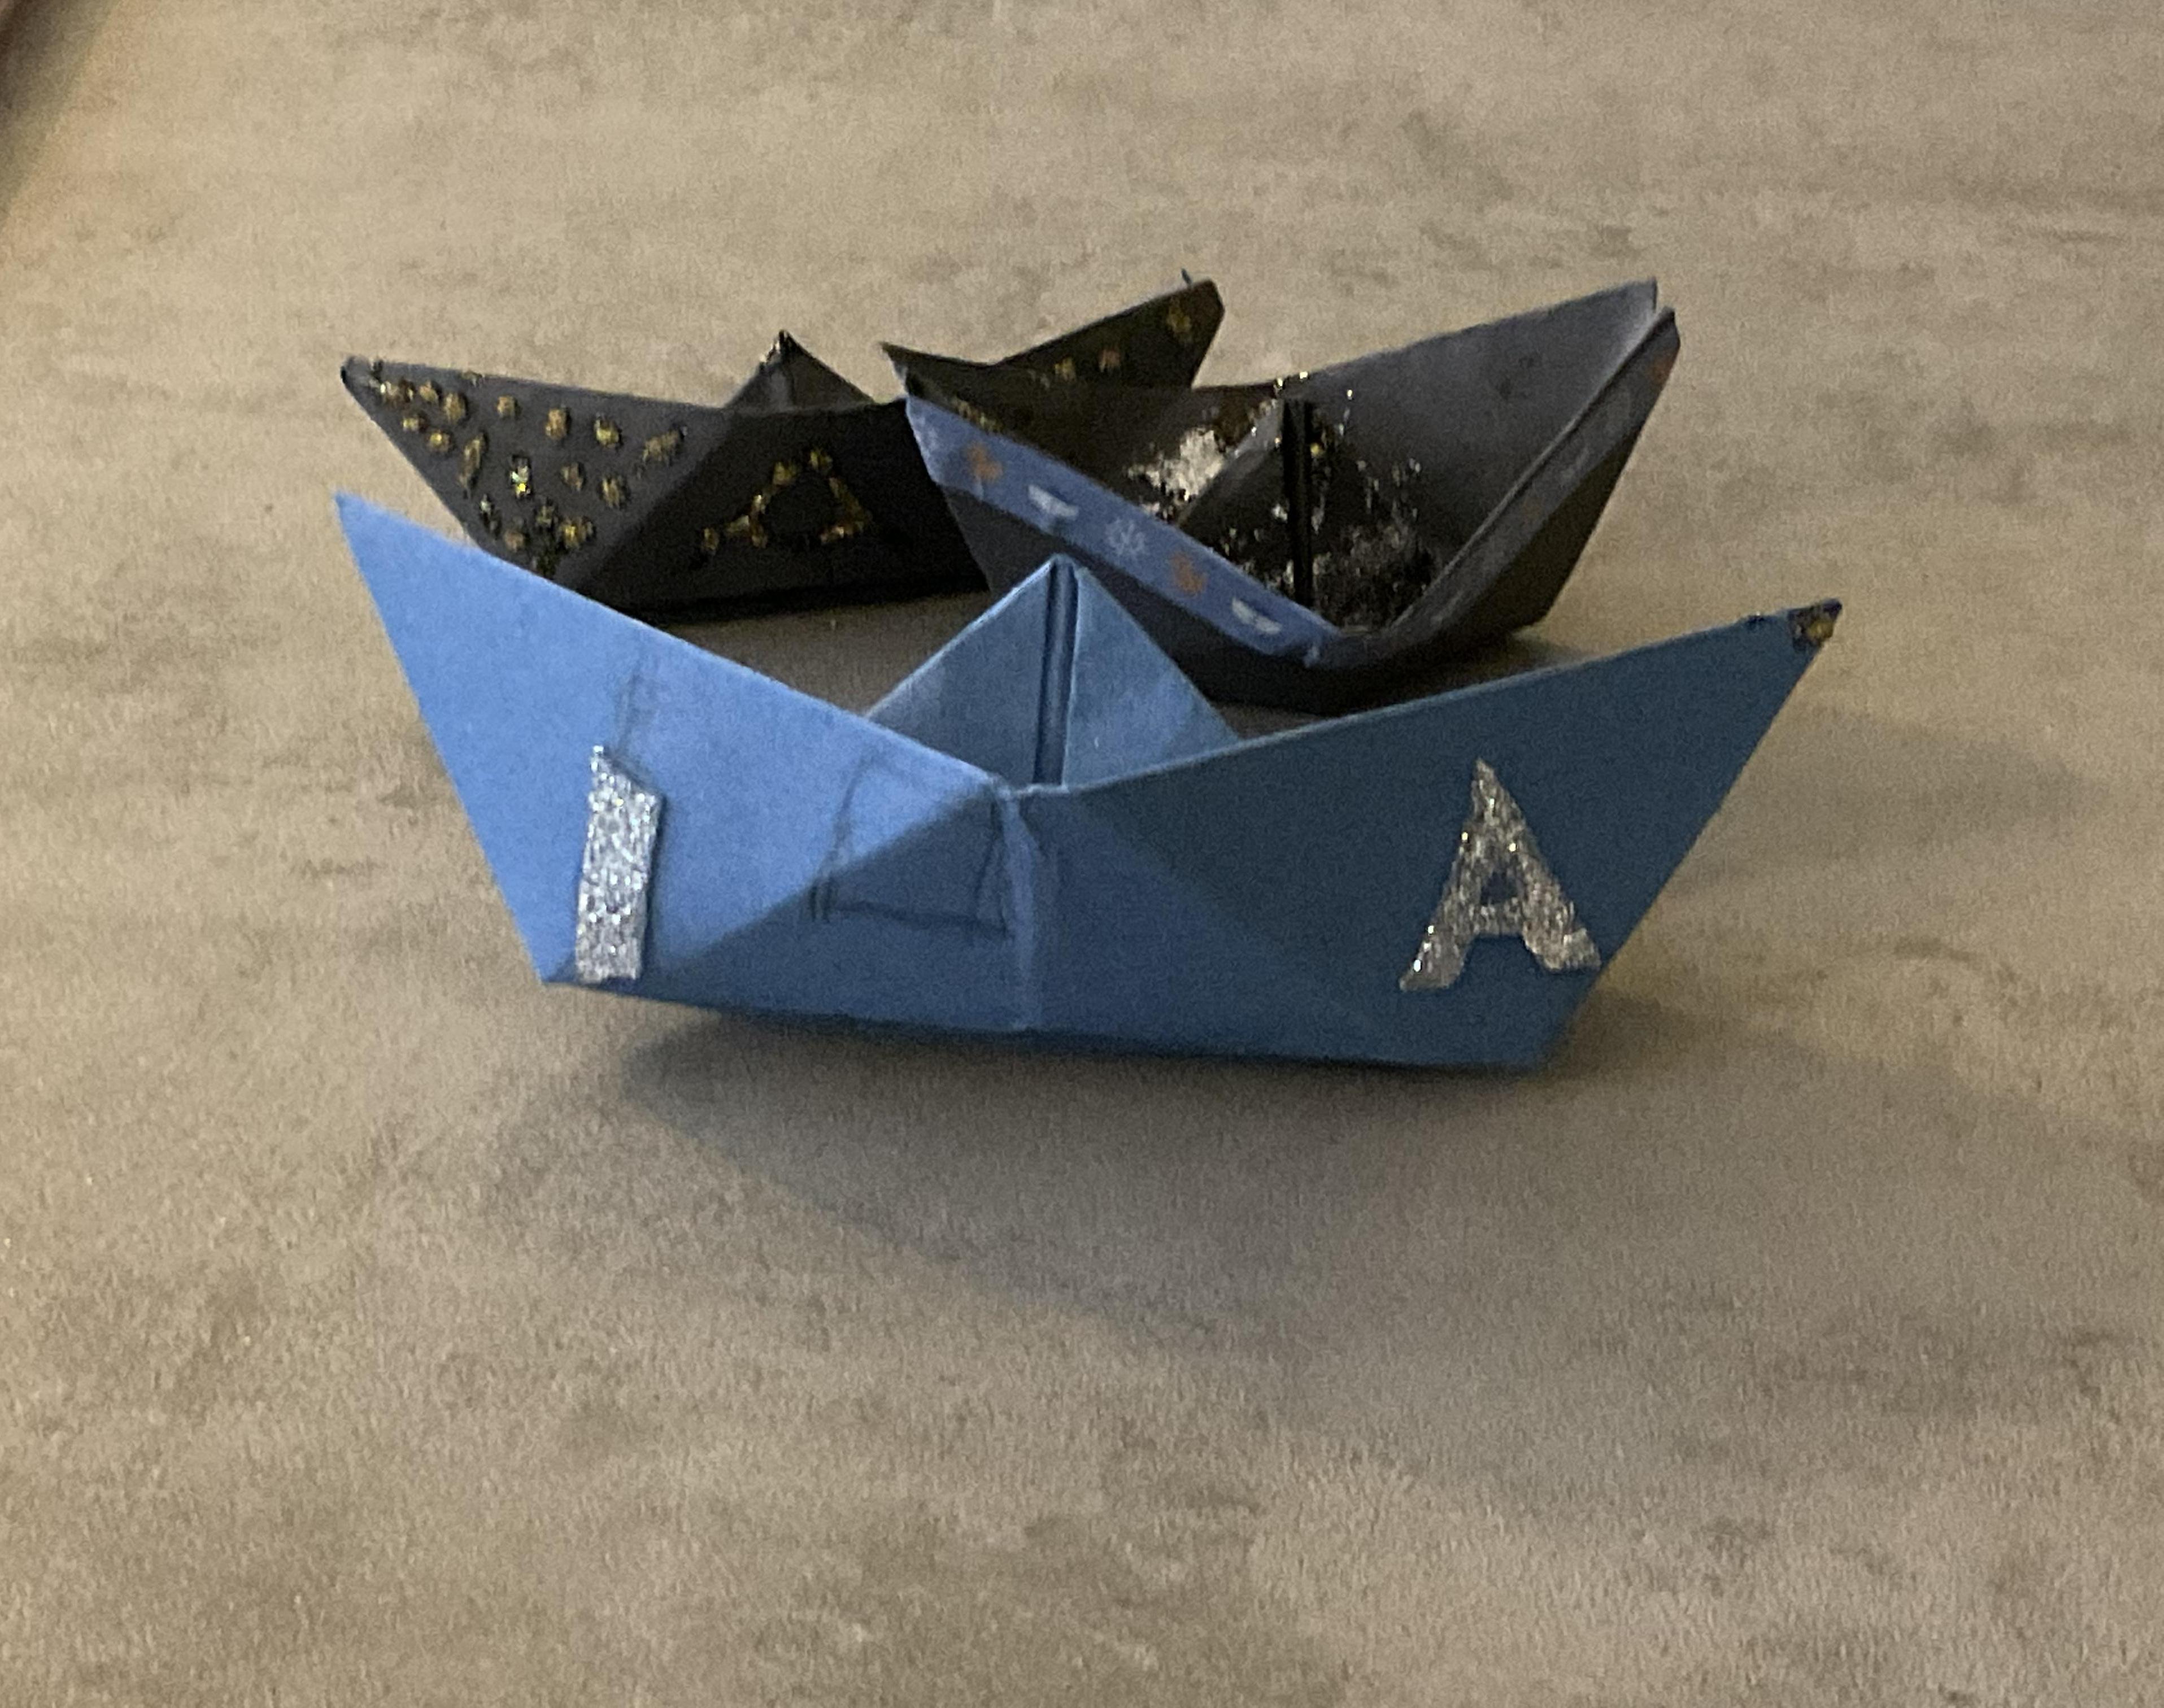 How to Make a Paper Boat